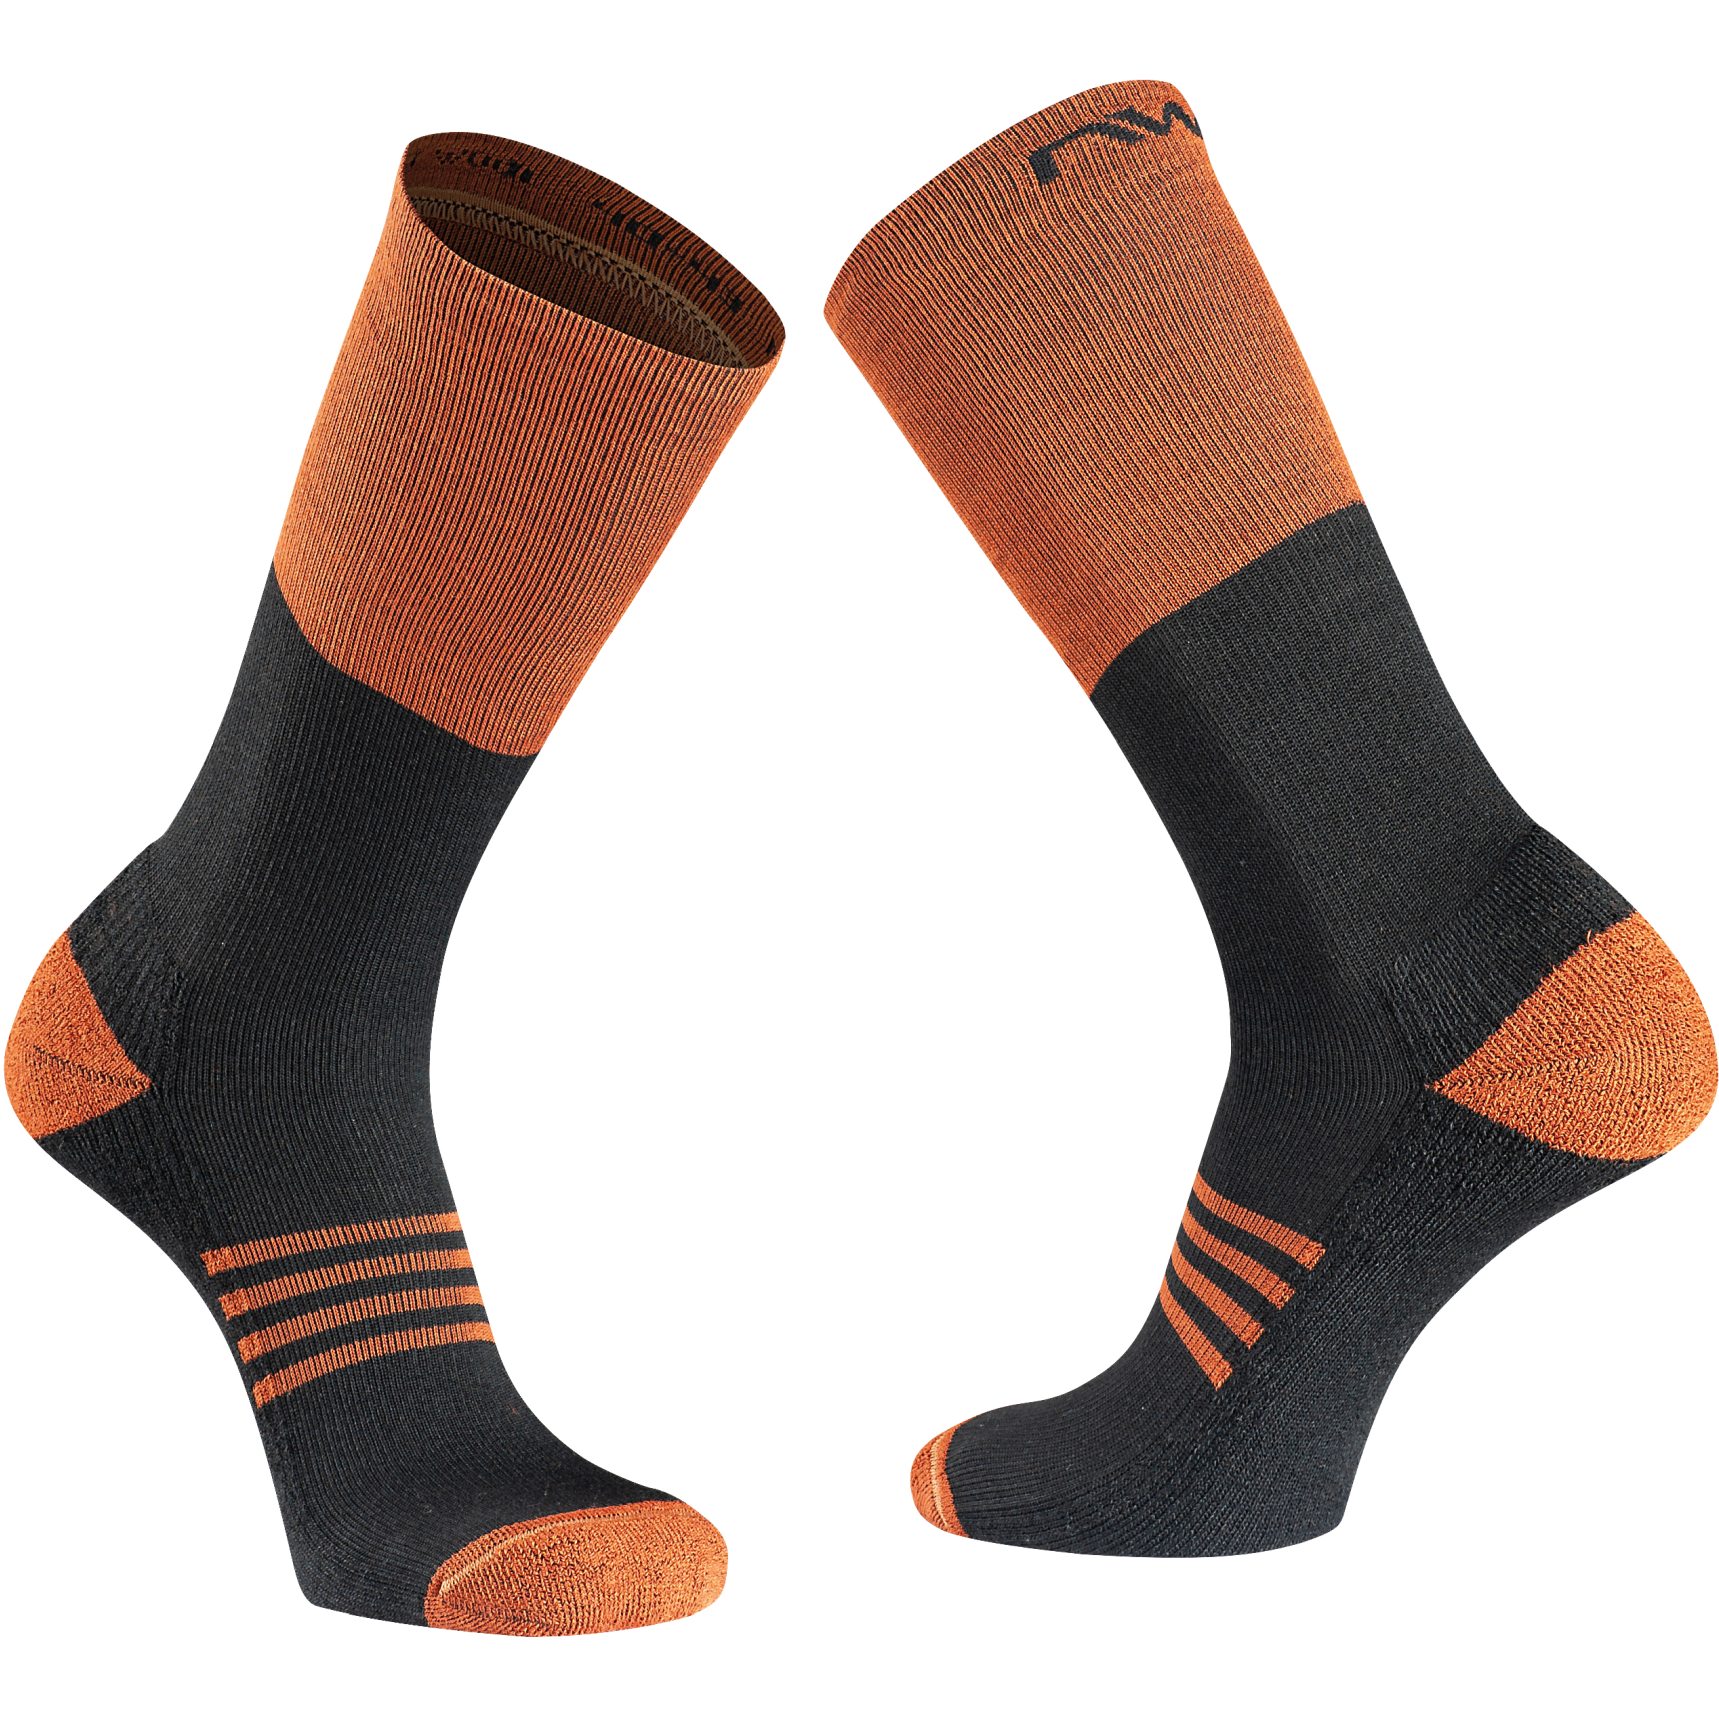 Picture of Northwave Extreme Pro High Socks - black/cinnamon 13